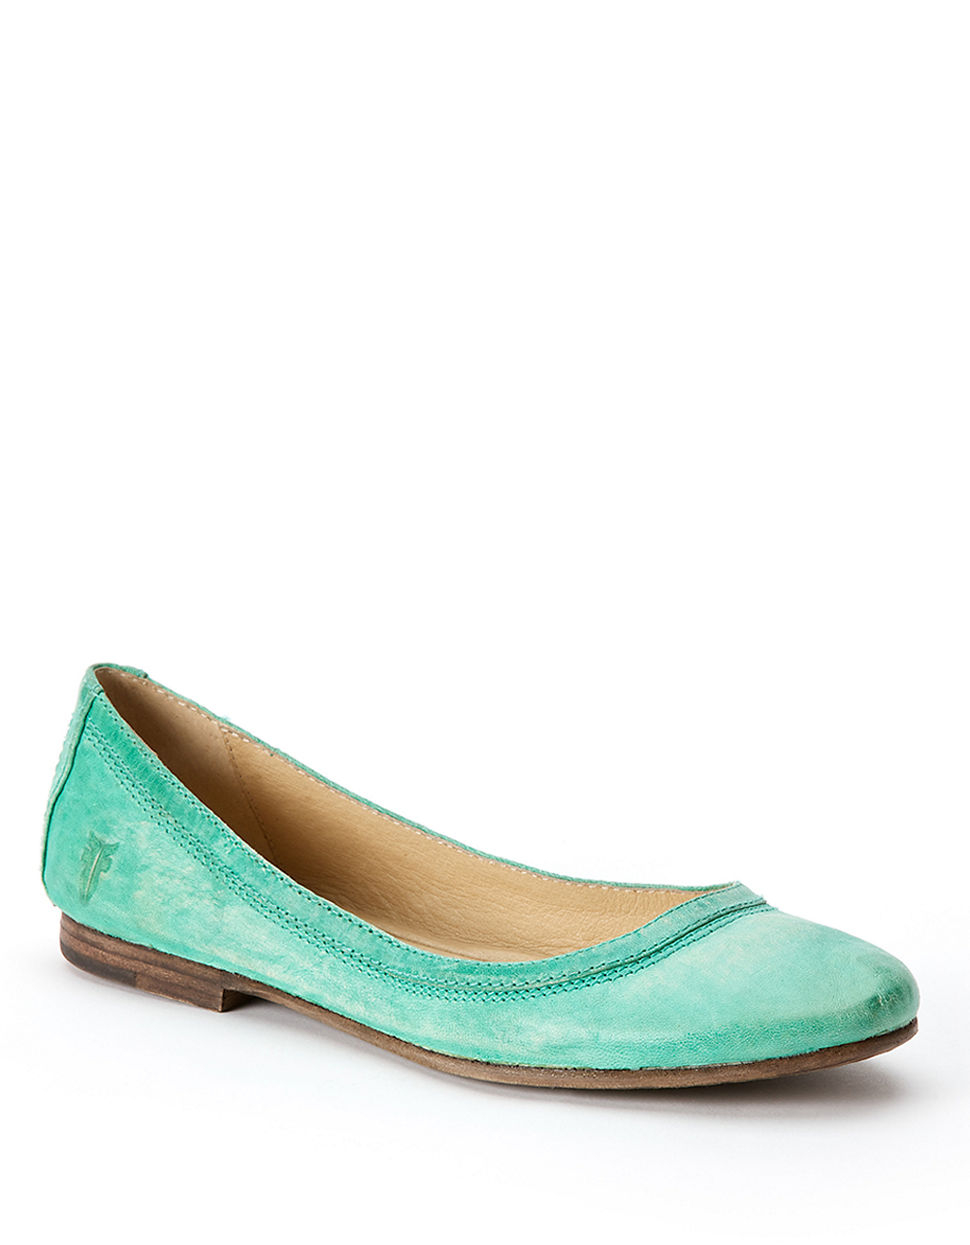 Frye Carson Leather Ballet Flats in Blue (Turquoise) | Lyst